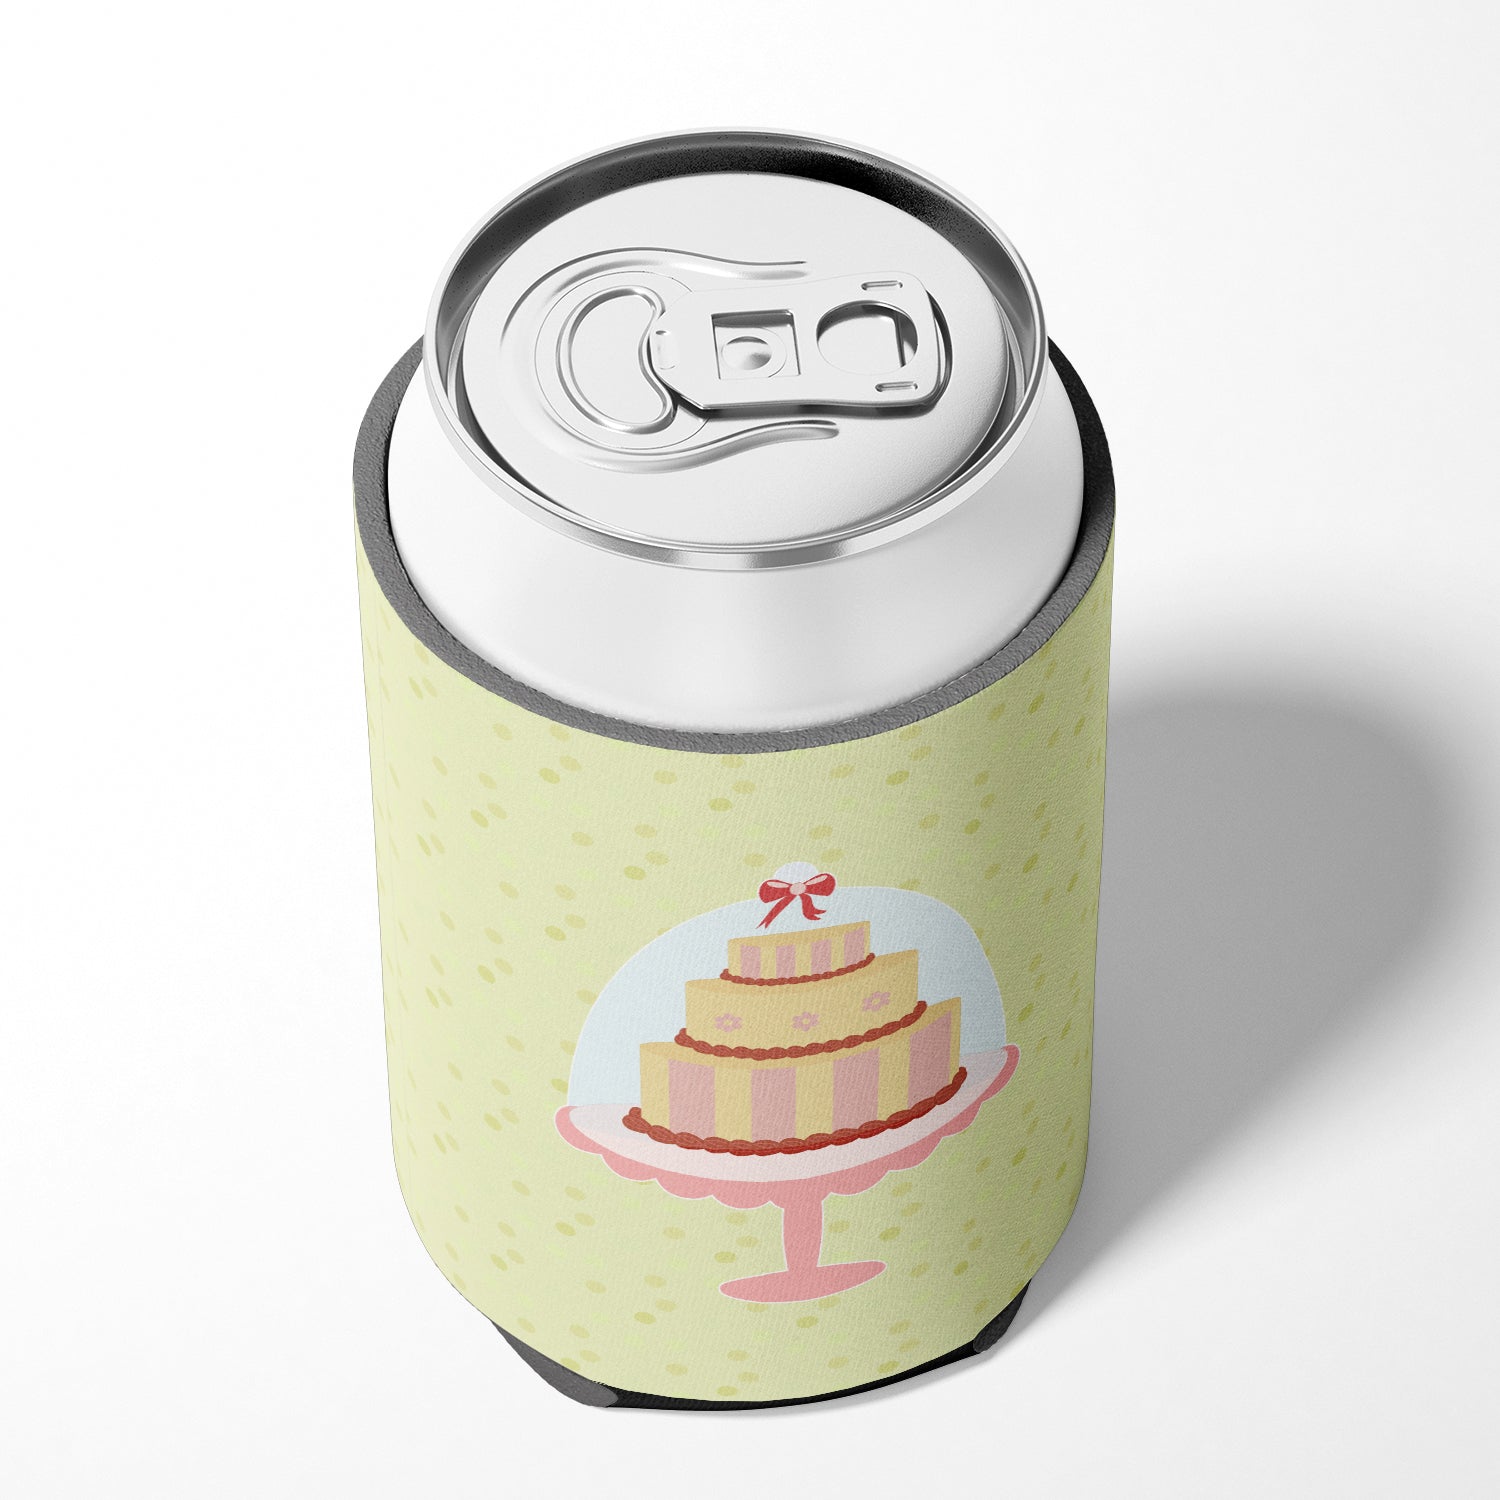 Decorated Cake on Green Can or Bottle Hugger BB7305CC